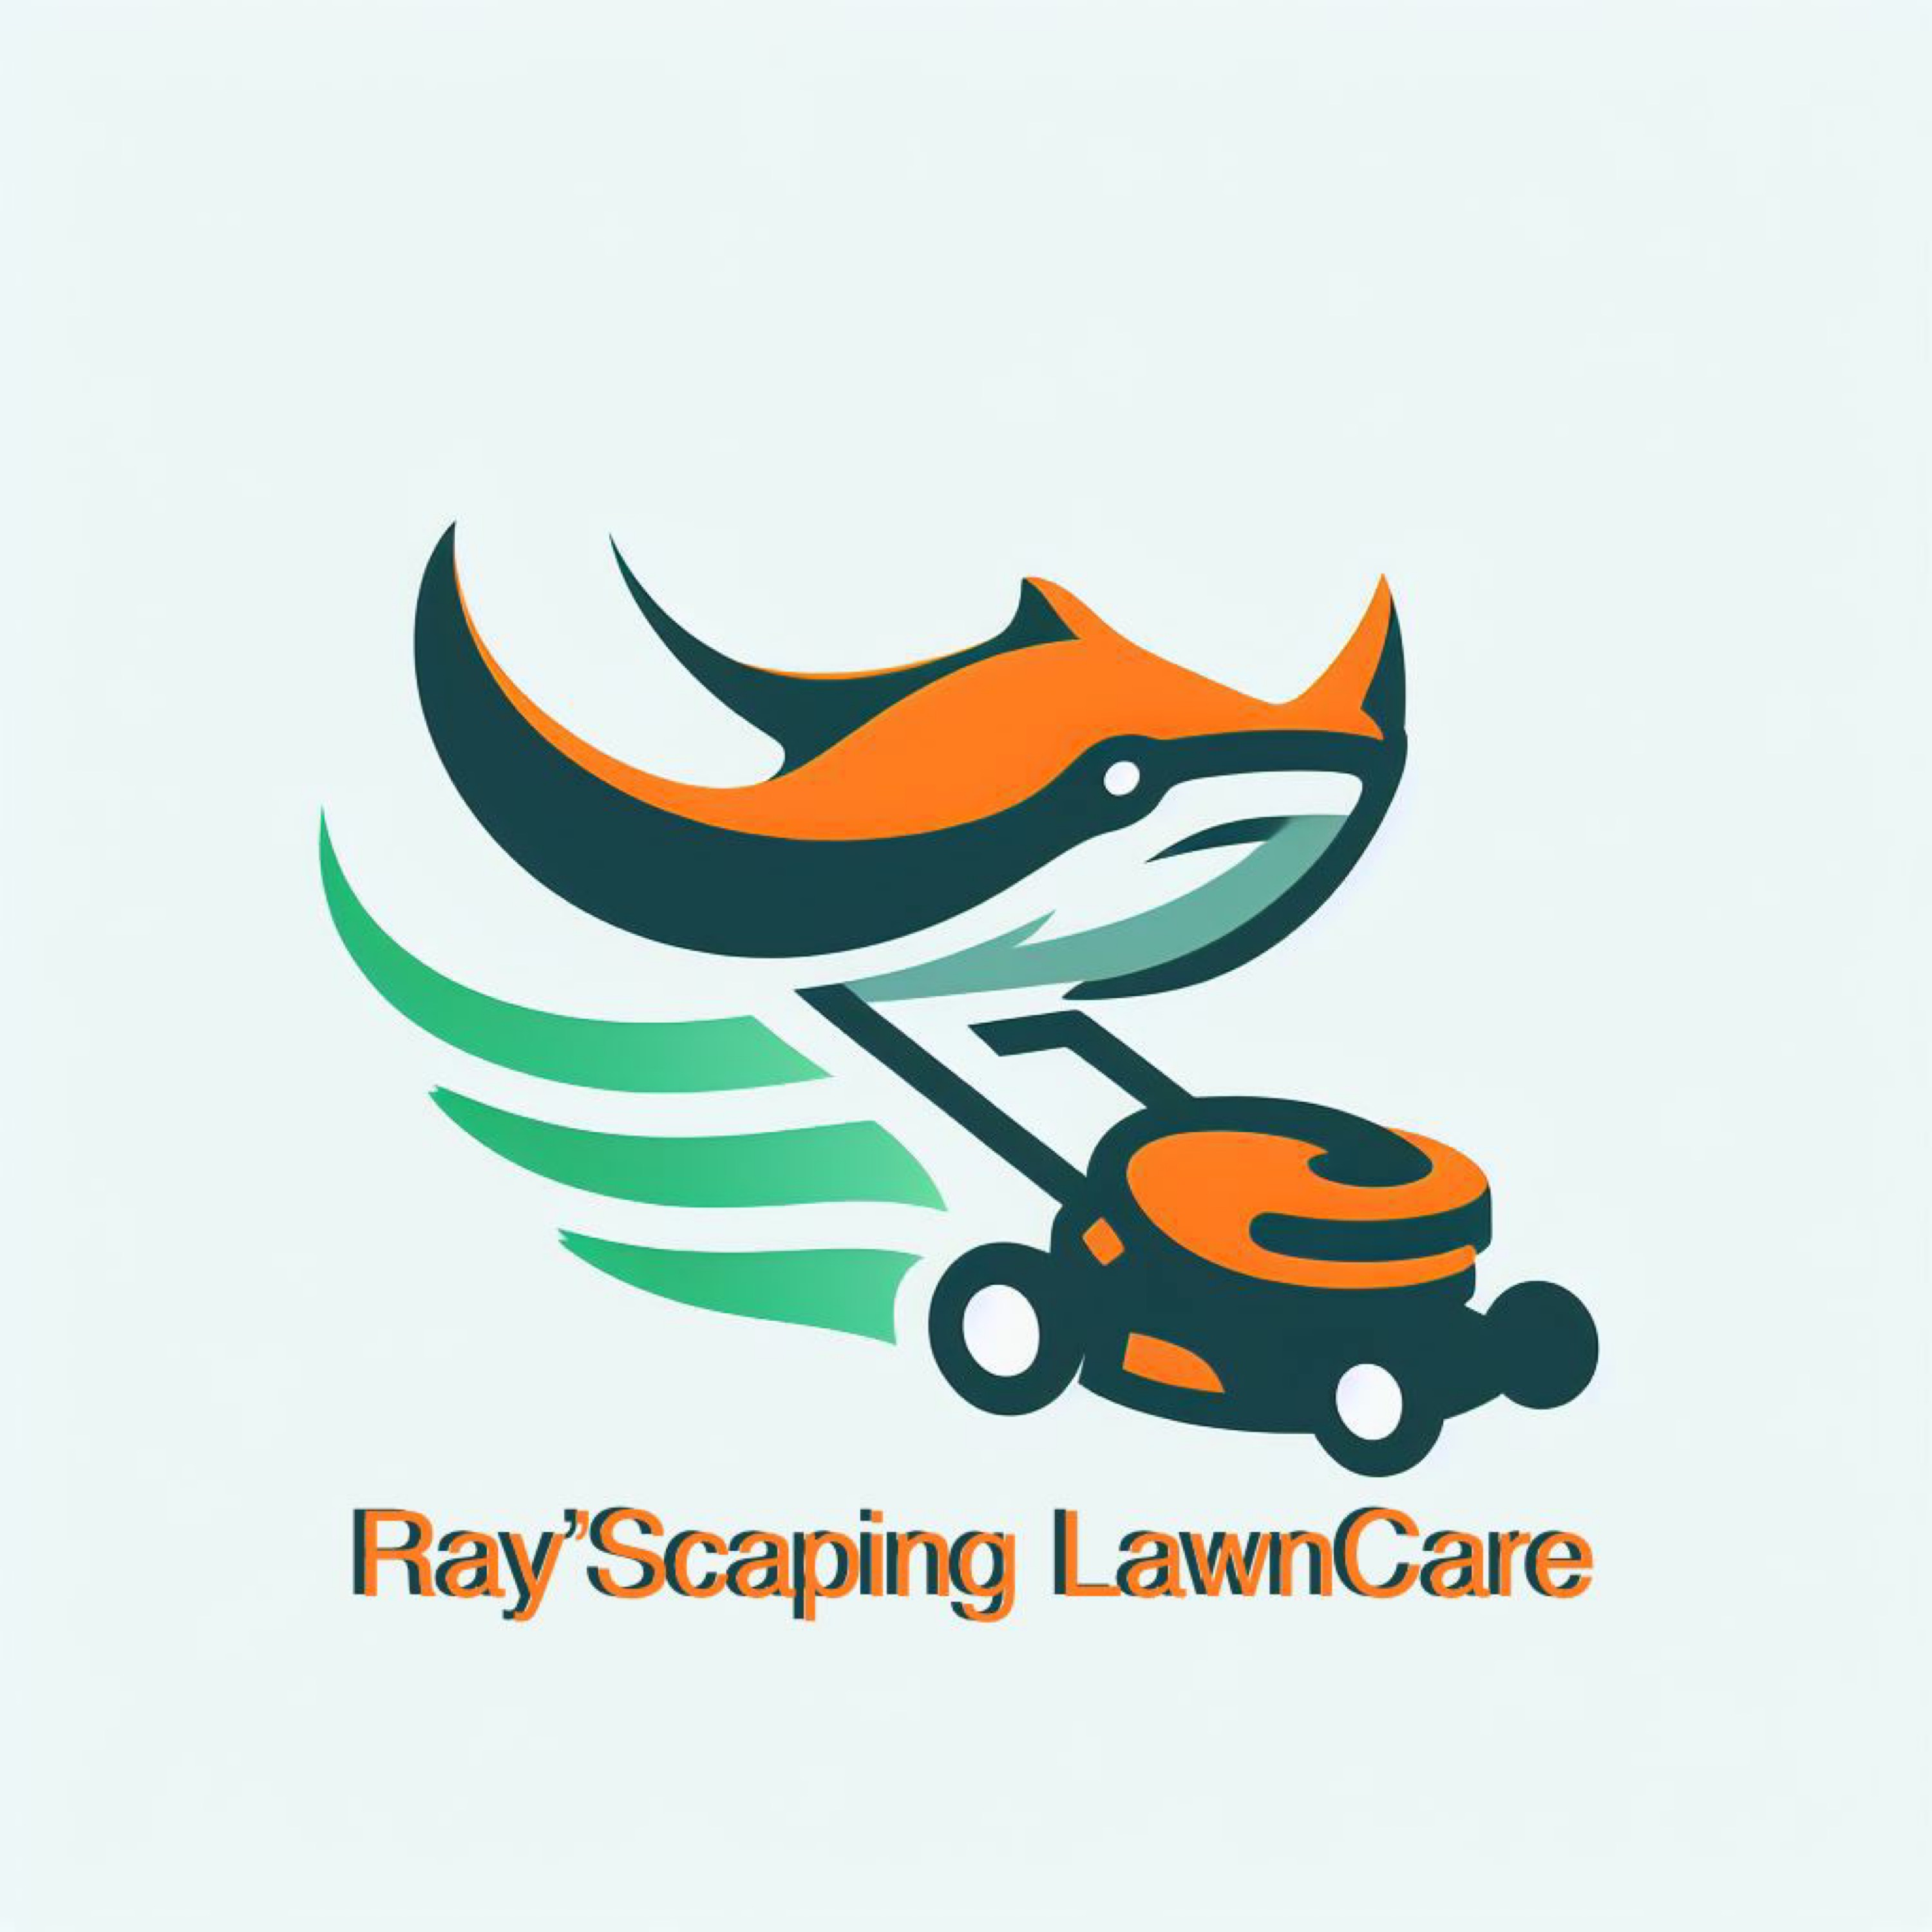 Ray'Scaping Lawncare Logo